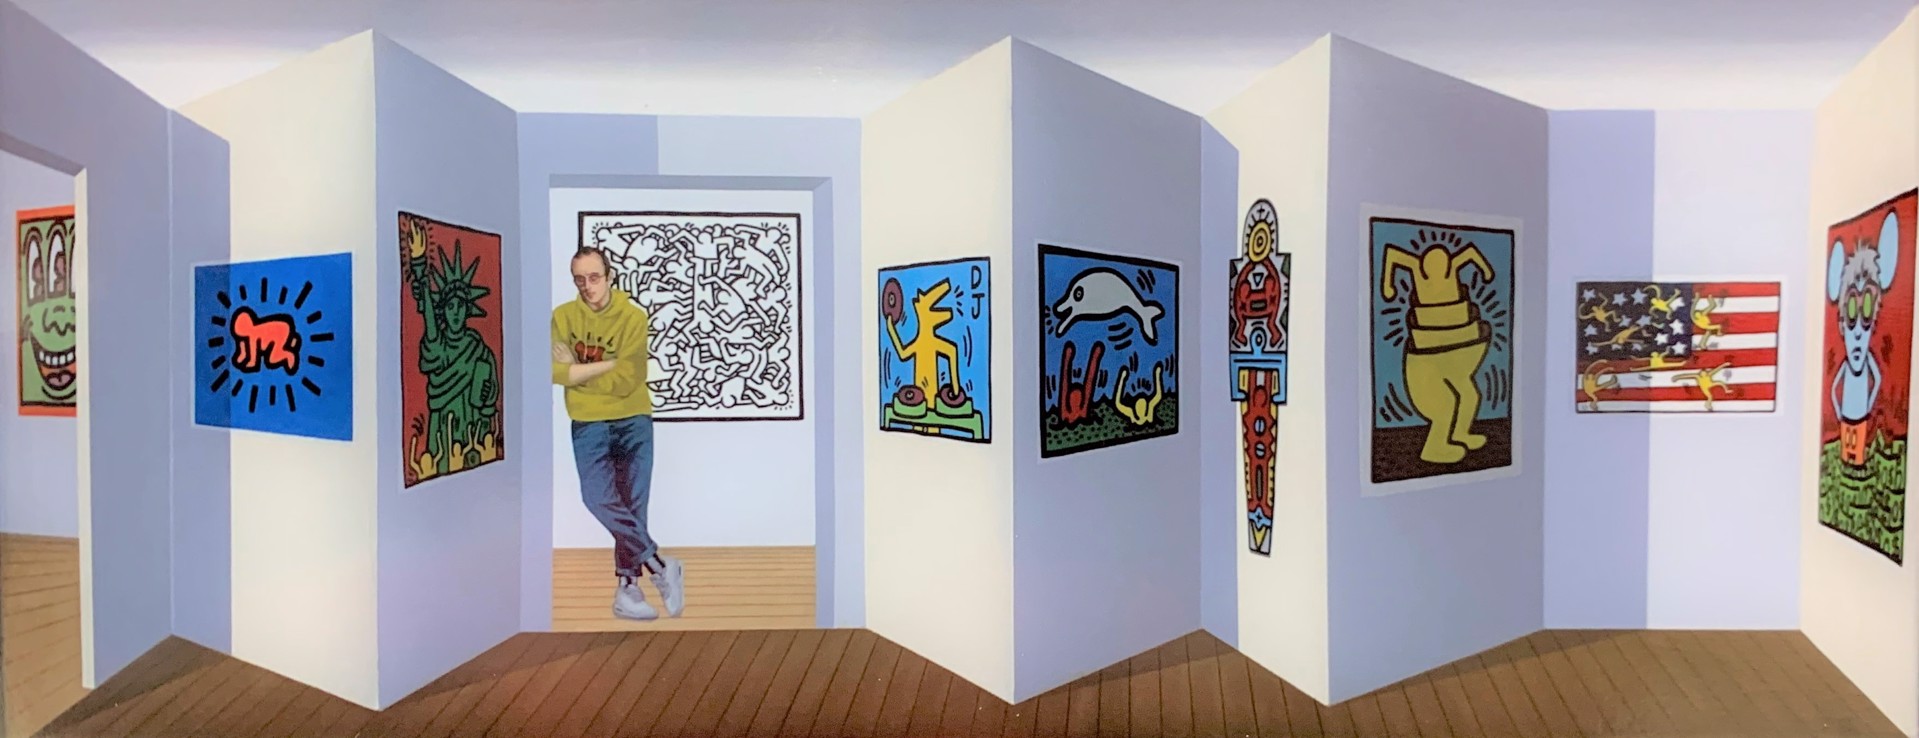 Gallery 110 (Haring) by Peter Roth